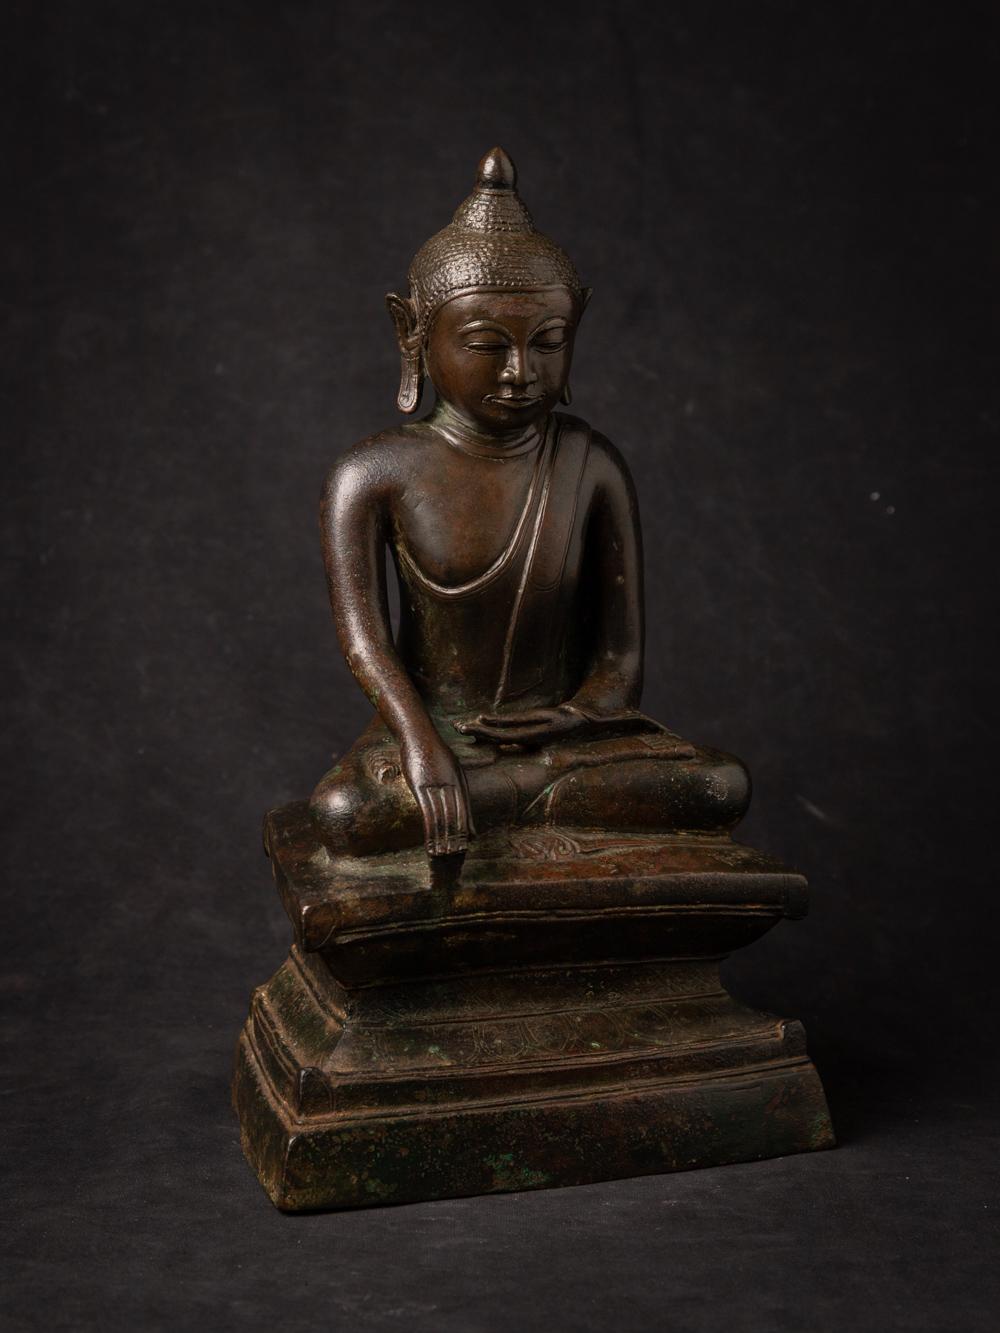 This bronze sculpture, originating from Burma in the 15th century, is a rare and remarkable piece of art. Crafted in the distinctive Toungoo style, it stands at a height of 34.2 cm and features dimensions of 20.1 cm in width and 13.5 cm in depth.